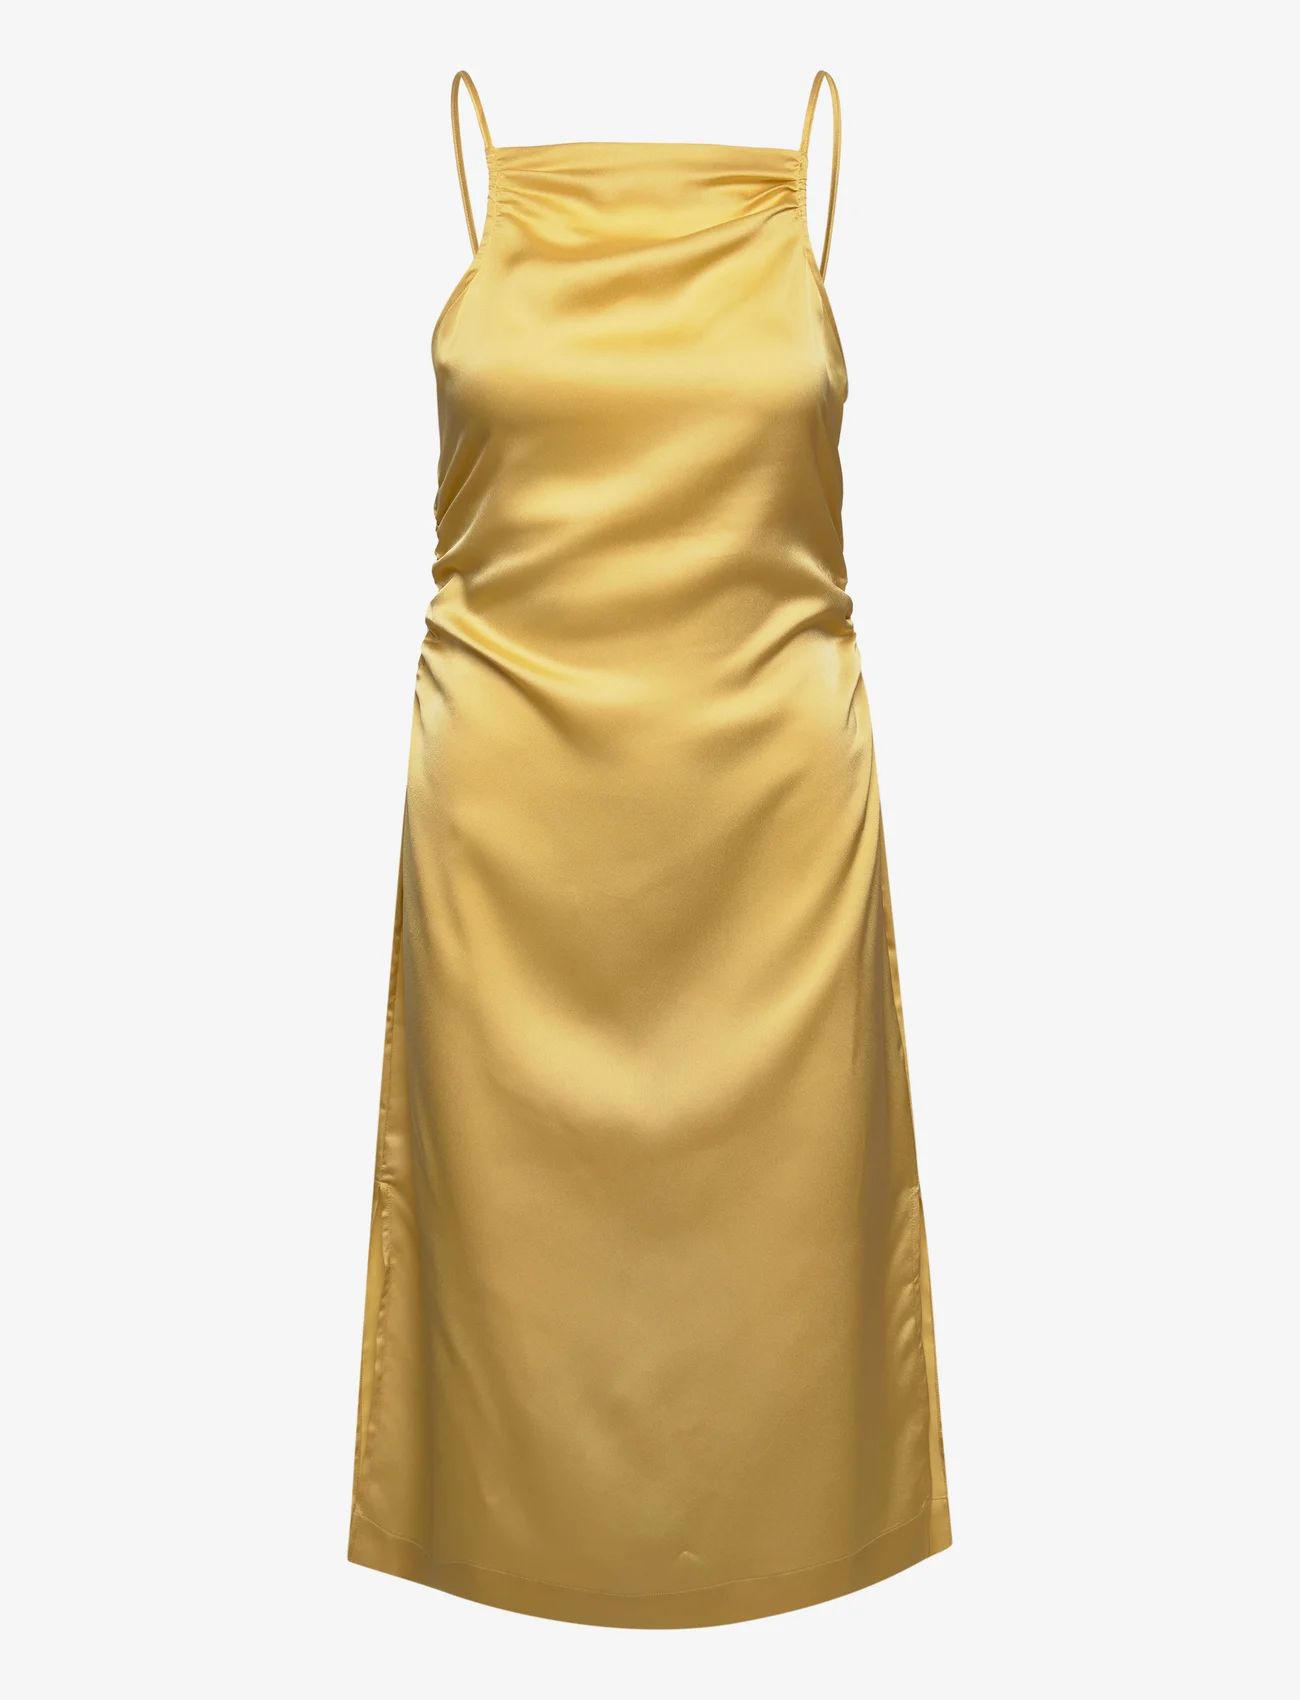 2NDDAY - 2ND Mae TT - Brushed Satin - party dresses - pampas - 0